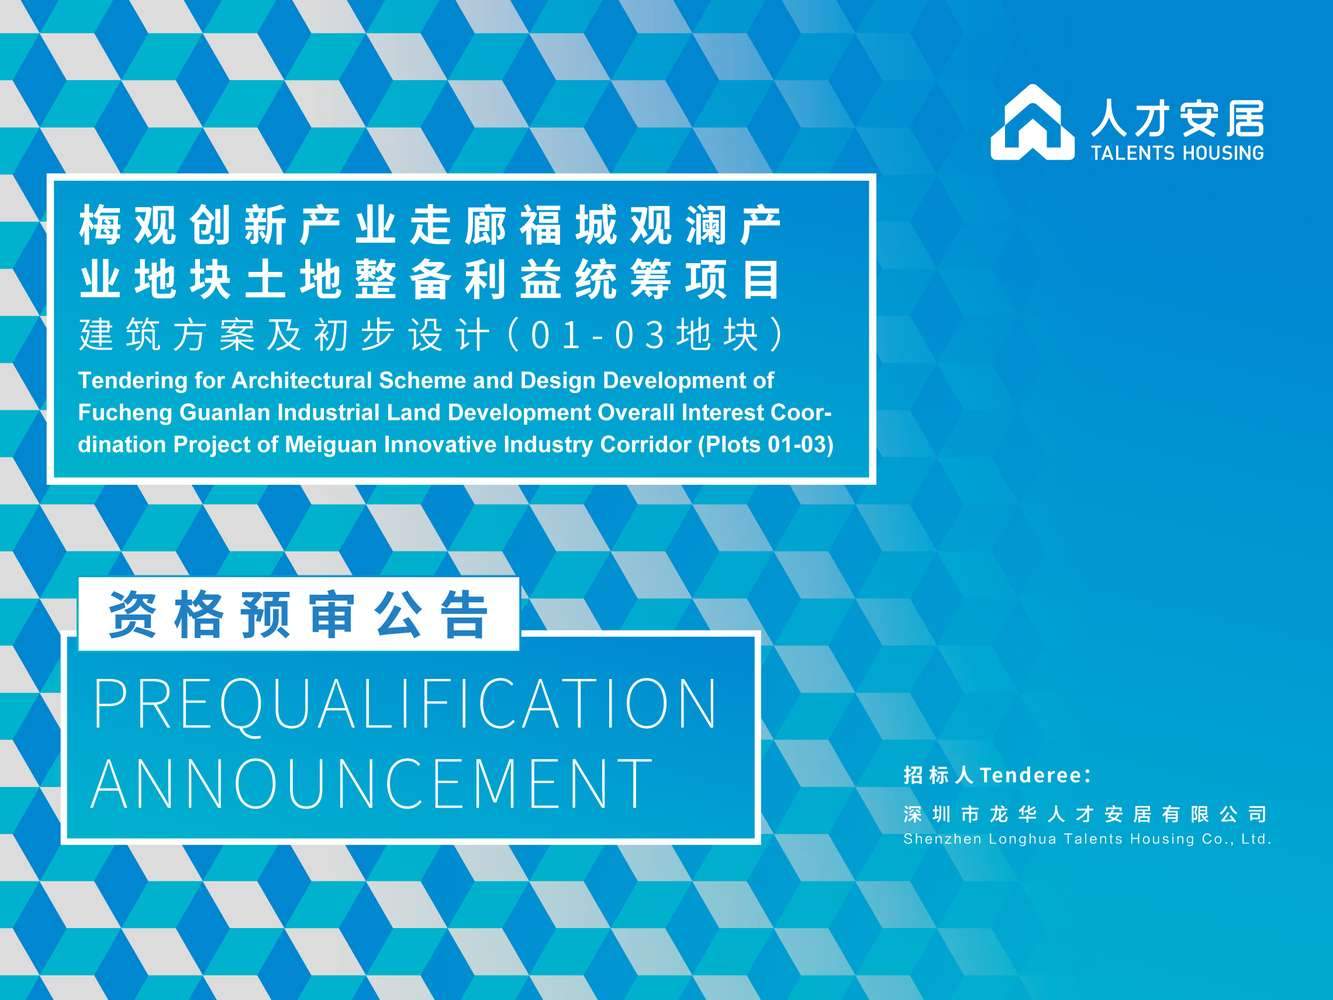 Prequalification Announcement on the Tendering for Architectural Scheme and Design Development of Fucheng Guanlan Industrial Land Development Overall Interest Coordination Project of Meiguan Innovative Industry Corridor (Plots 01-03)